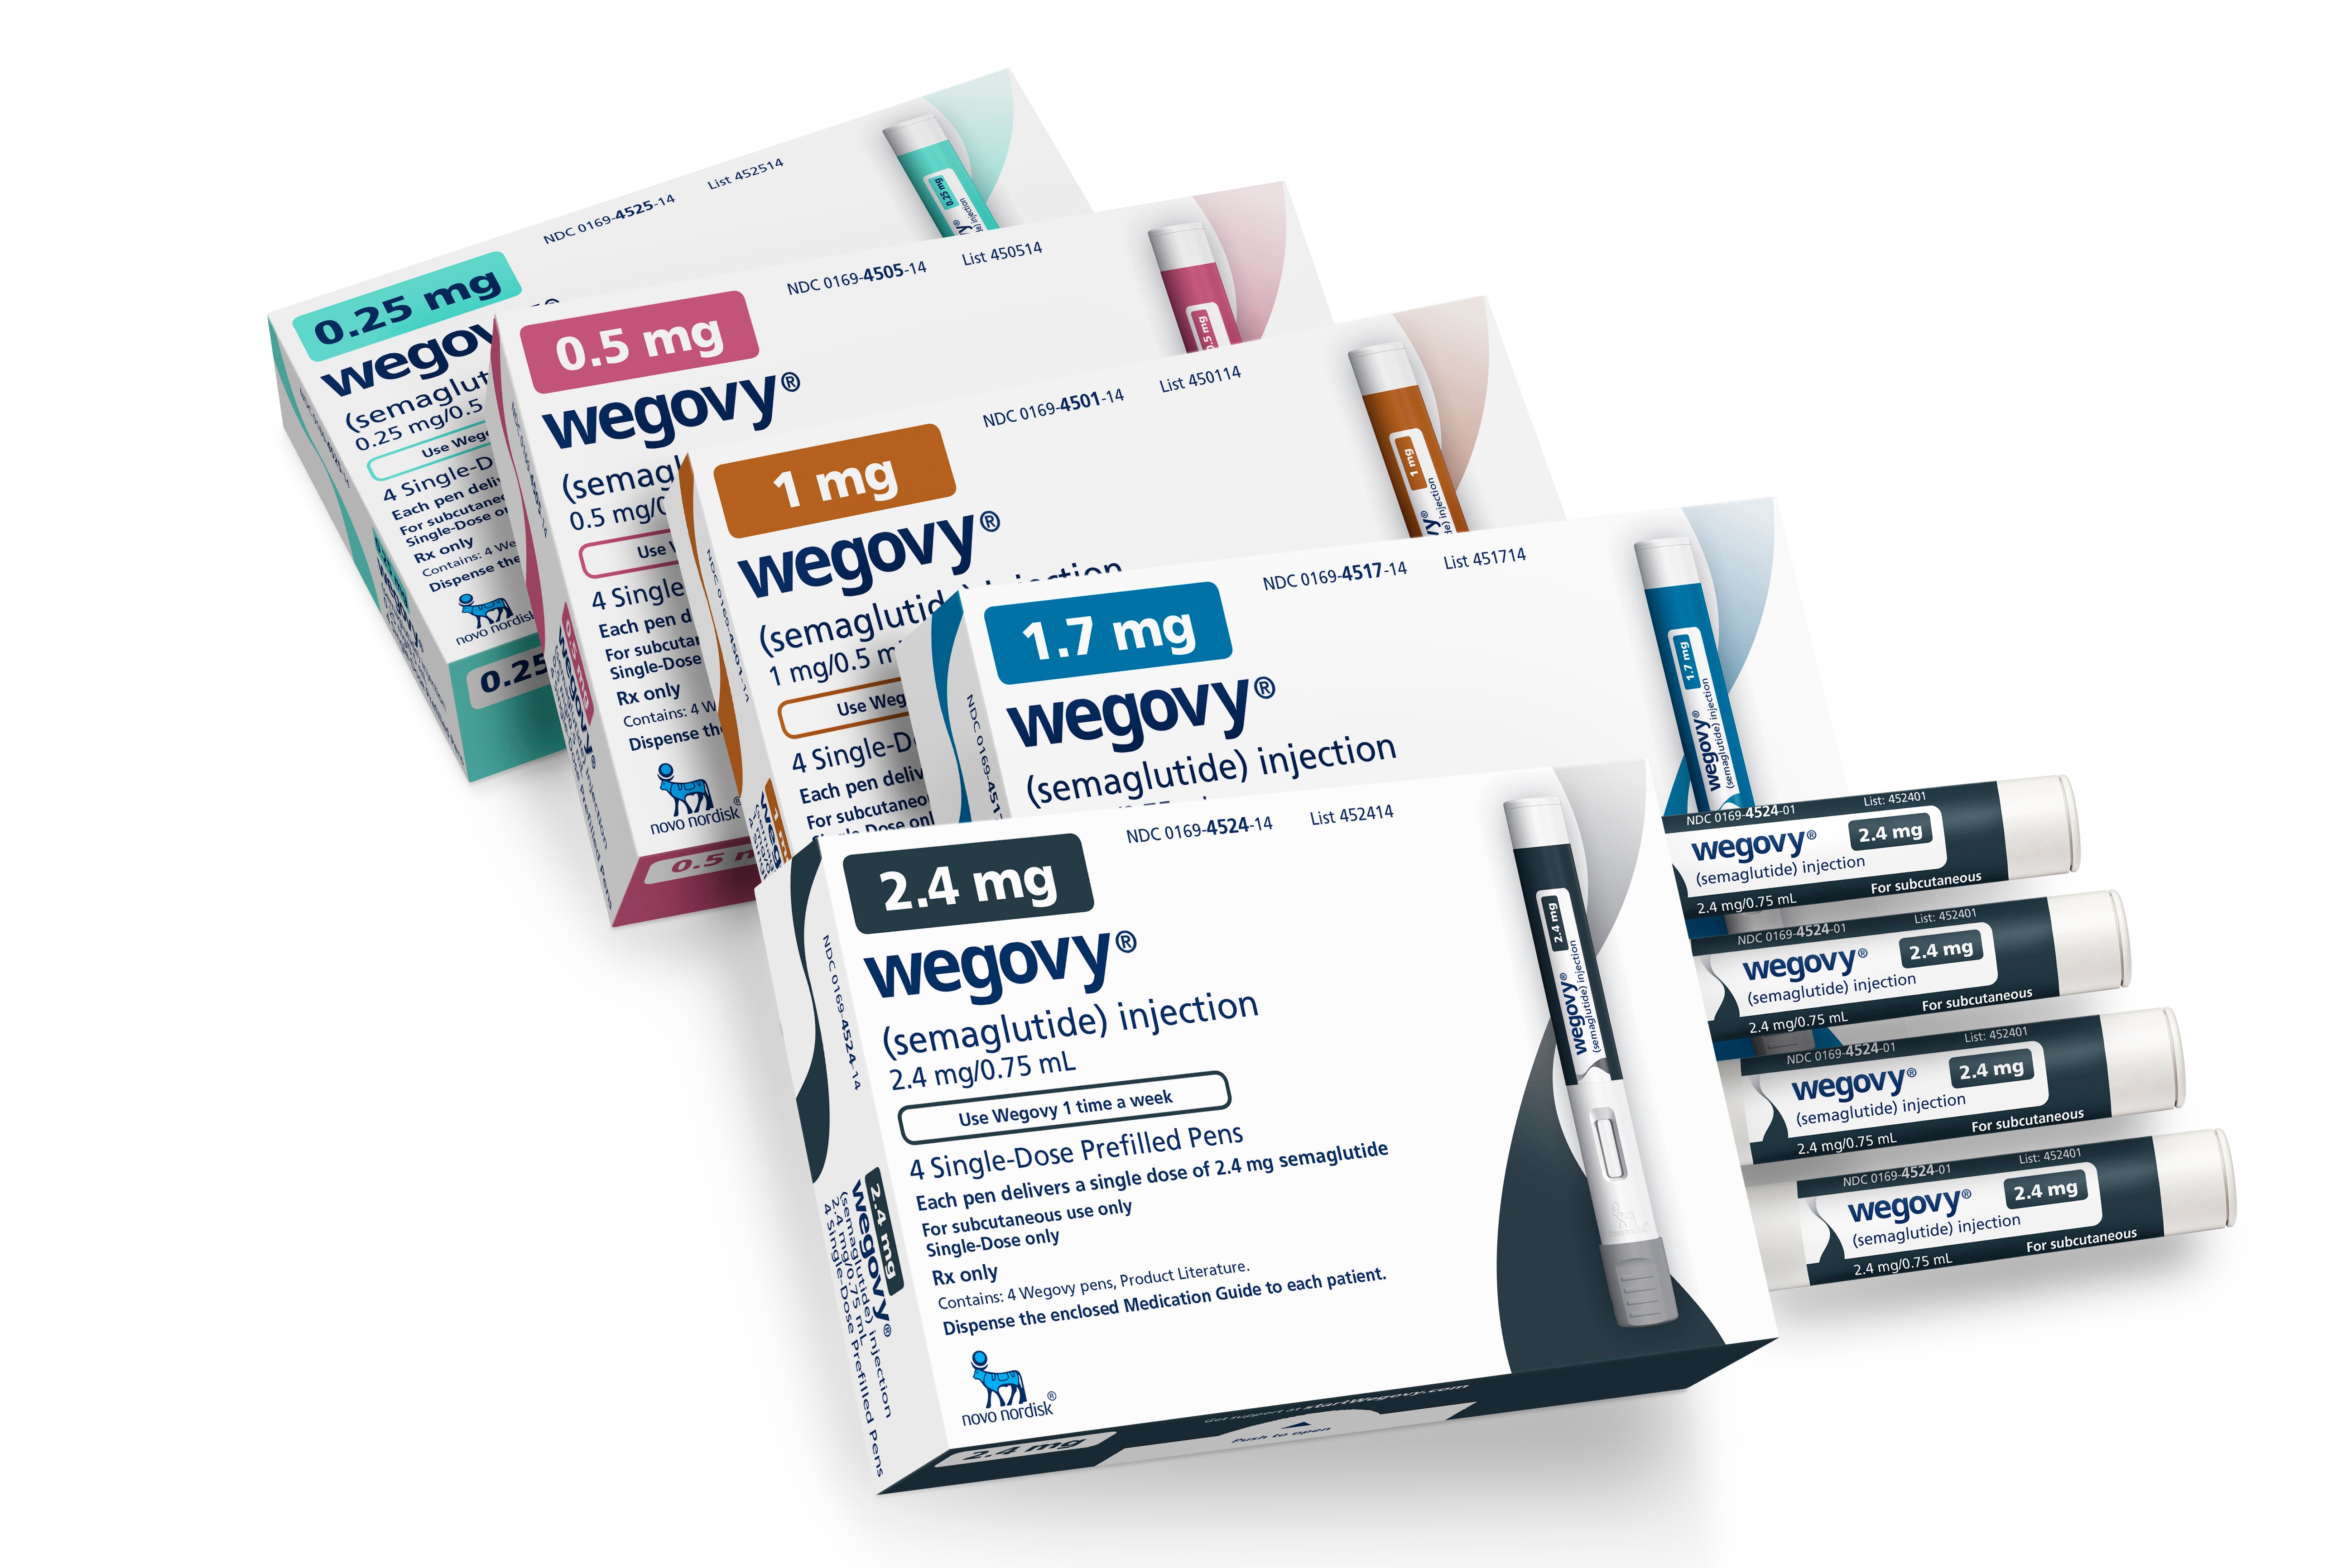 Wegovy Coupon: Save 20% on Your First Order - wide 4